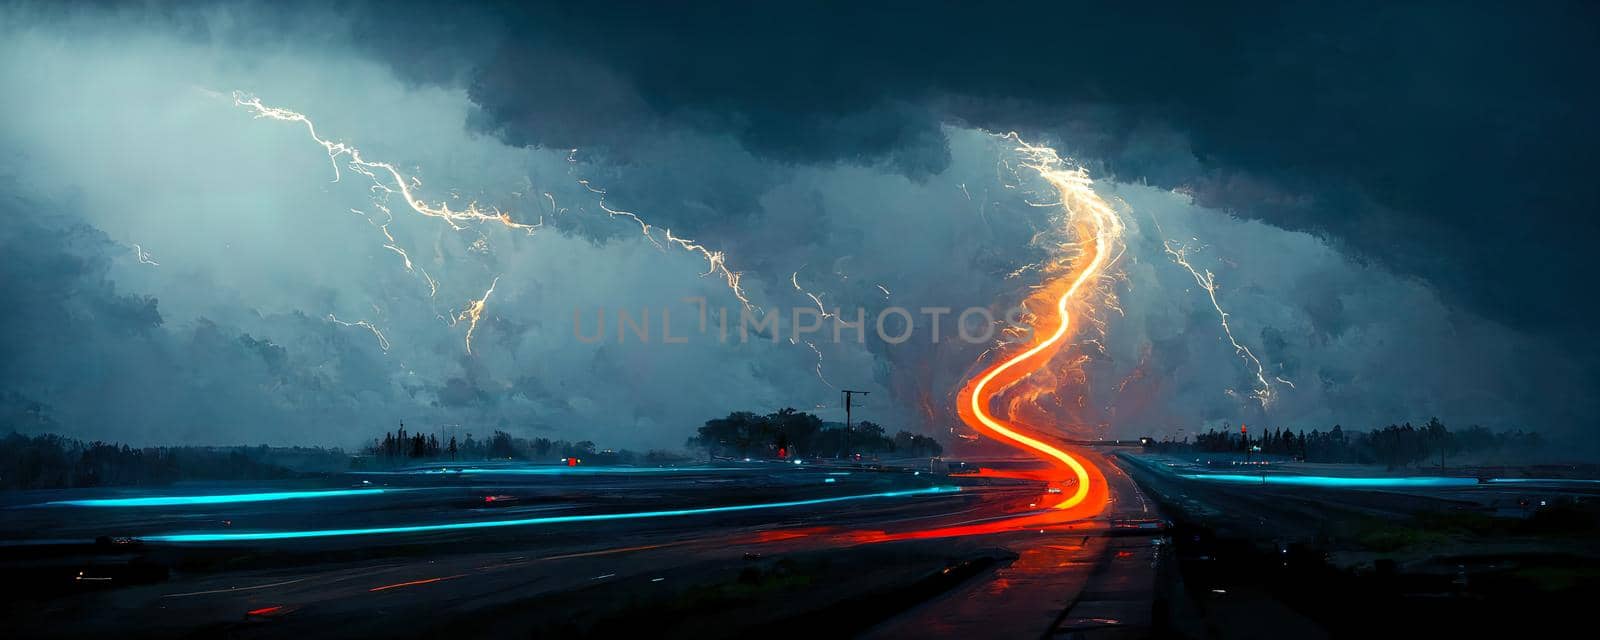 abstract illustration of huge lightning in the night sky Over the road during the rain by TRMK